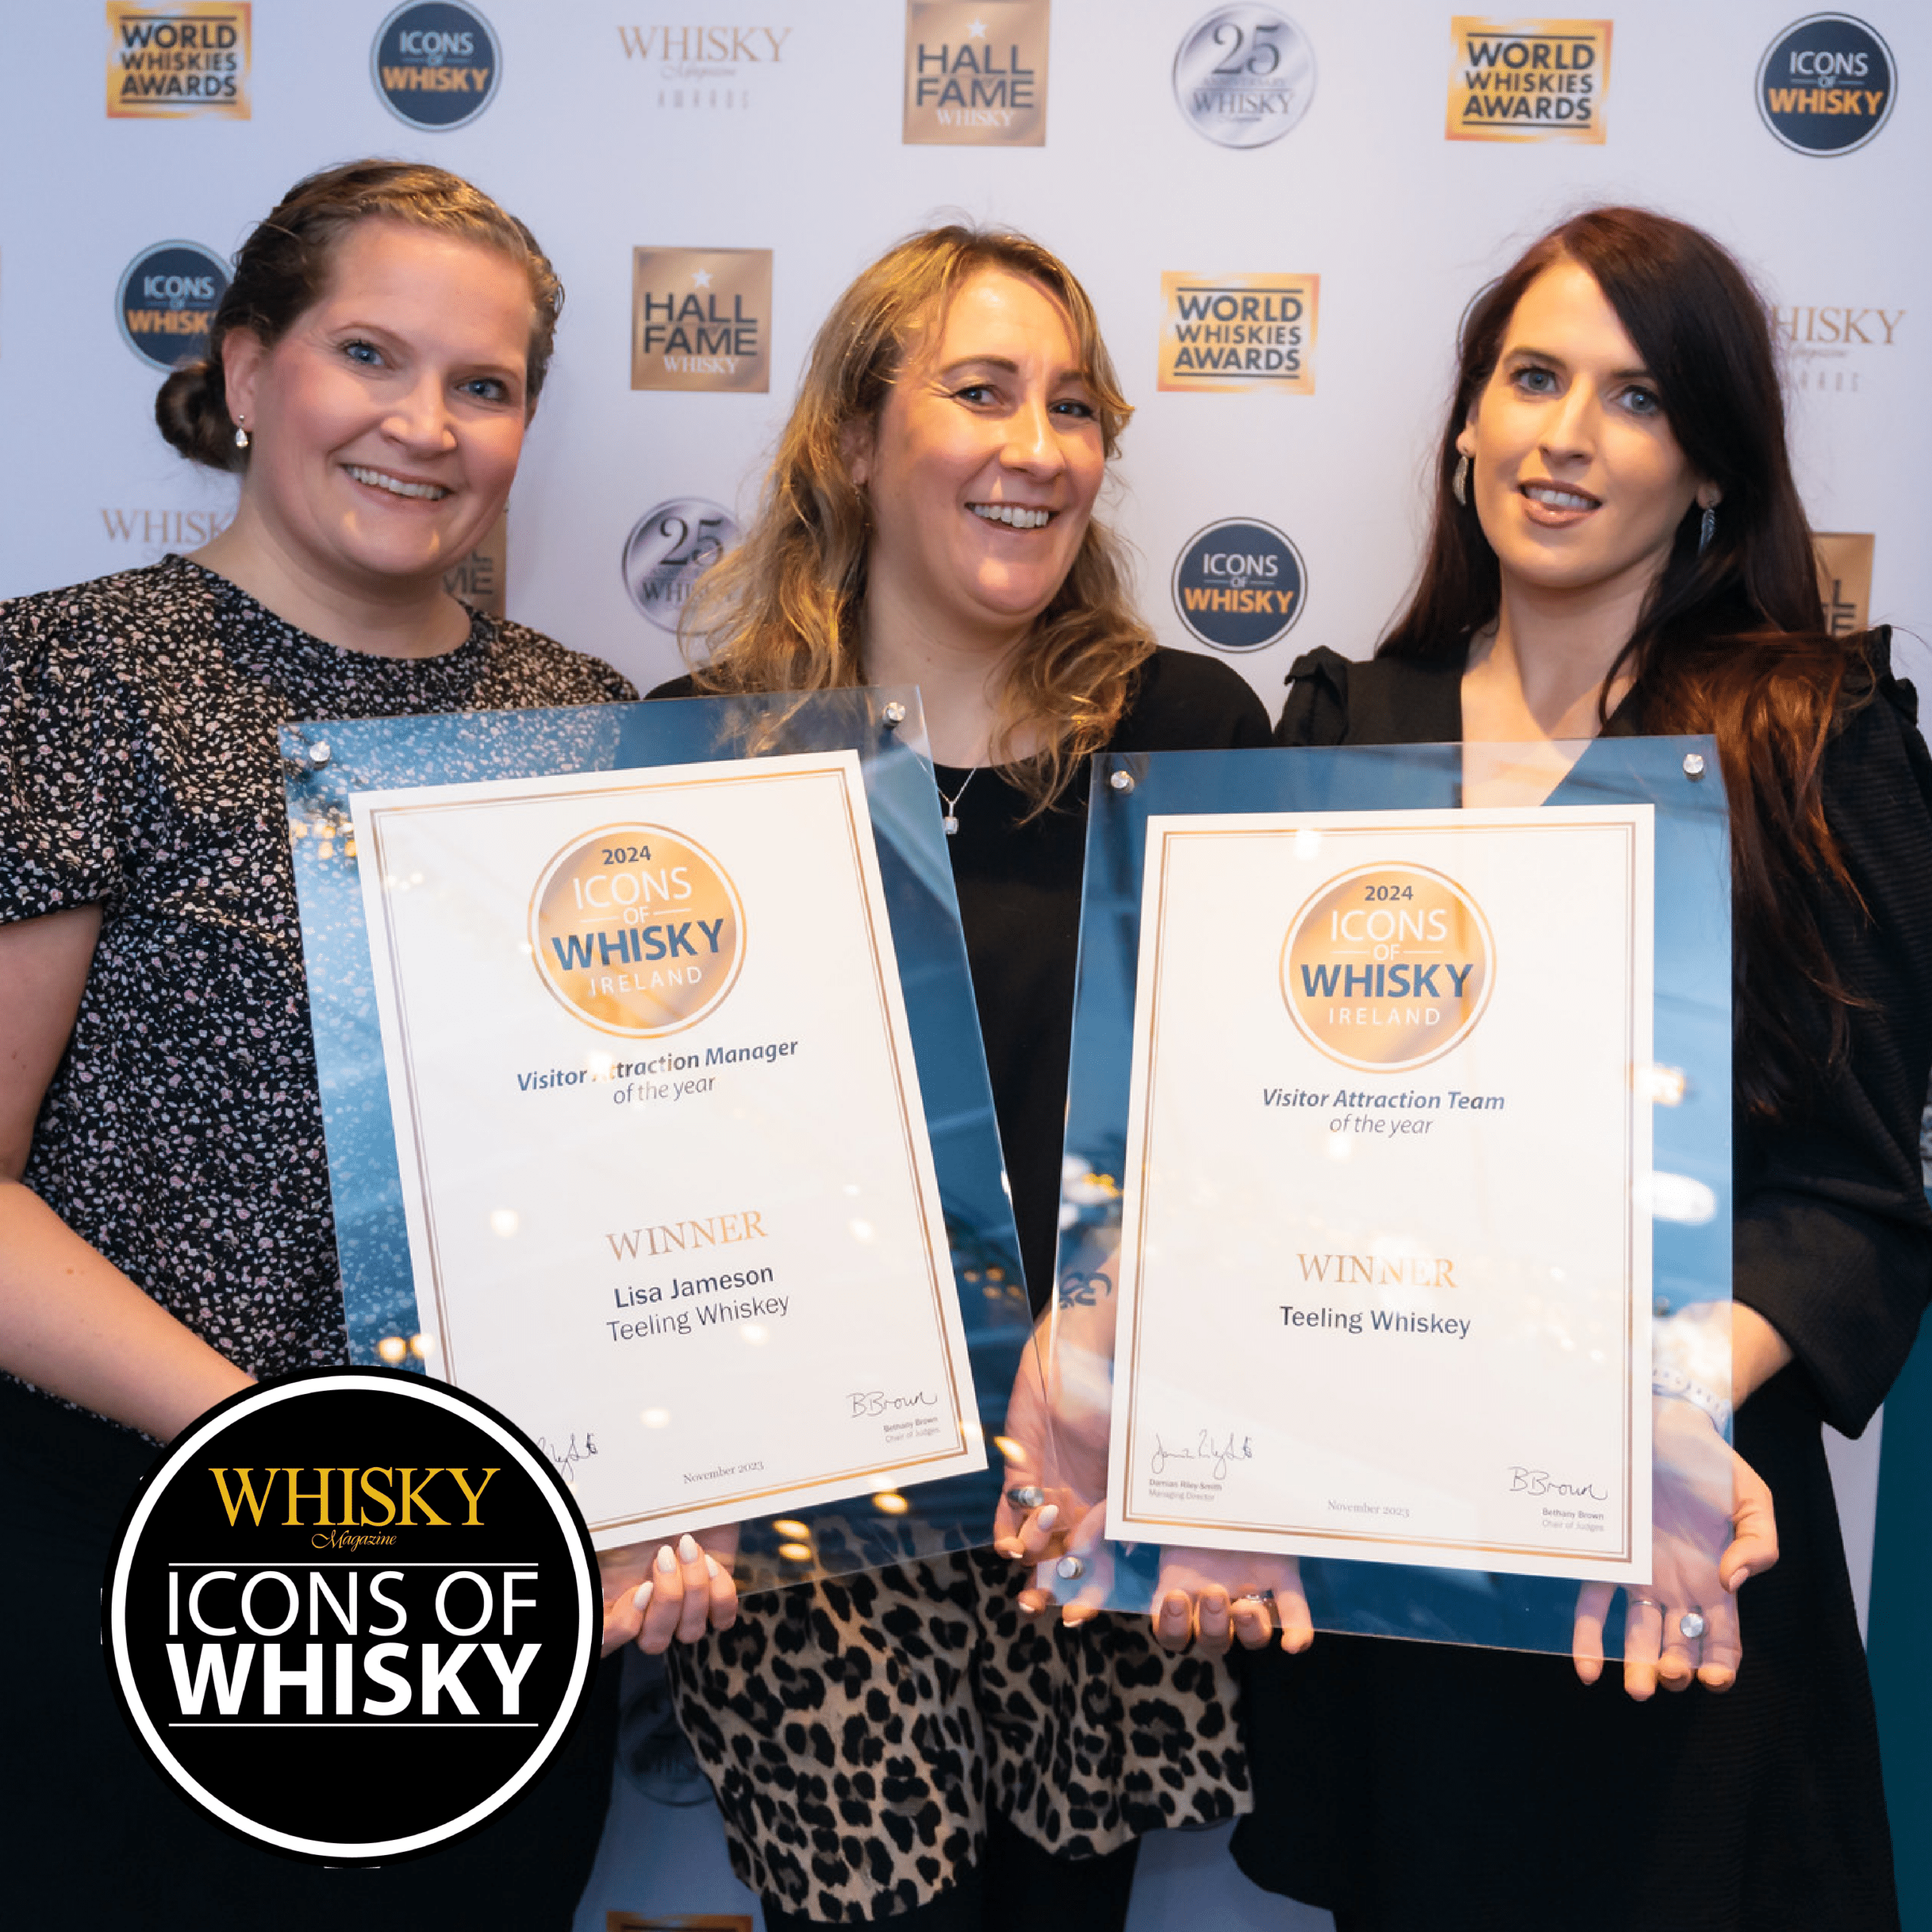 Teeling Whiskey Distillery wins best Visitor Attraction Team at the Irish Whiskey Icons Awards 2023